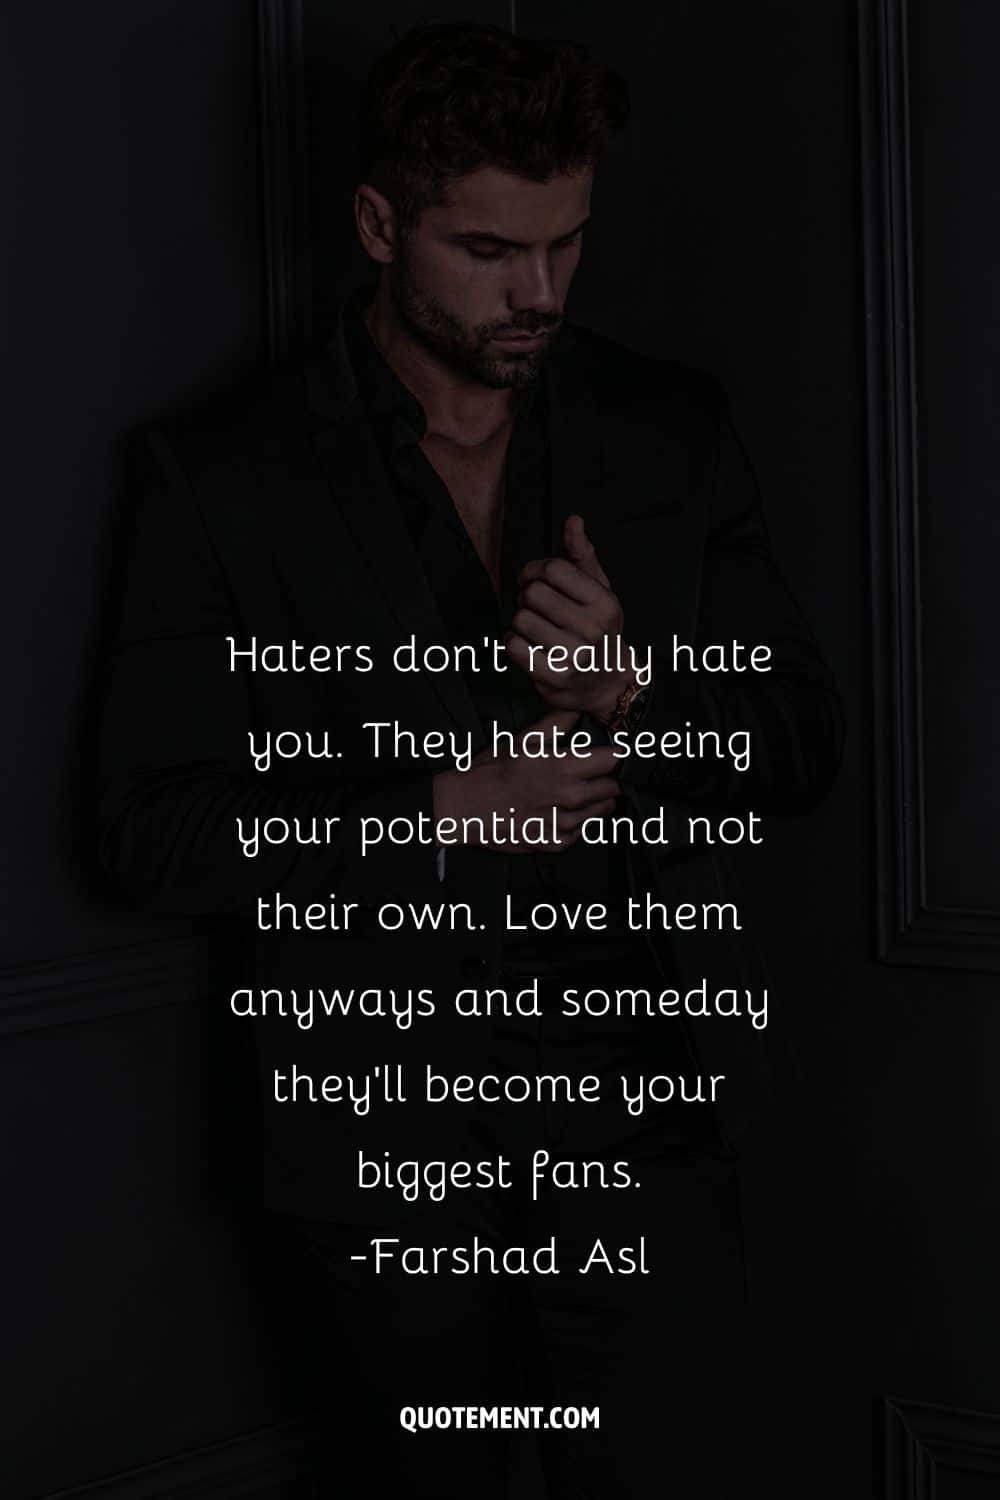 Haters don’t really hate you. They hate seeing your potential and not their own